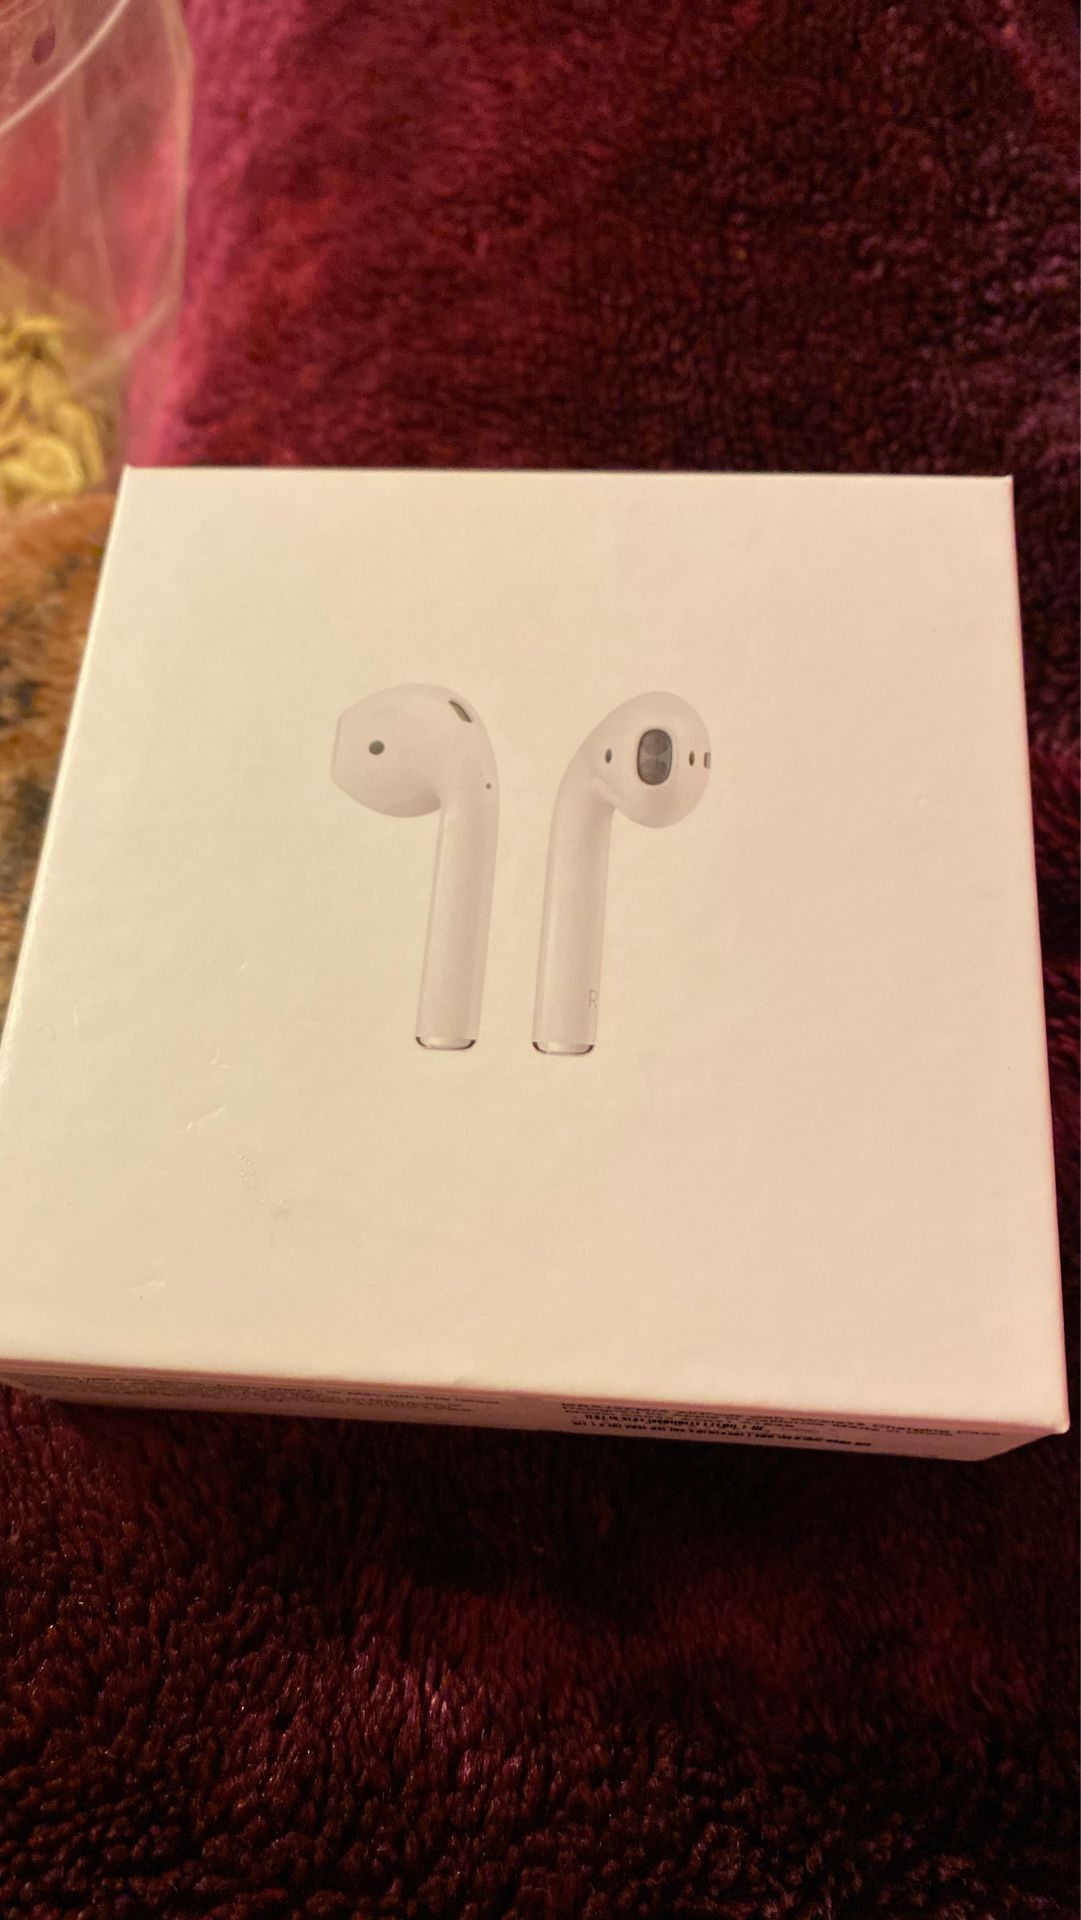 New Airpods generation 2